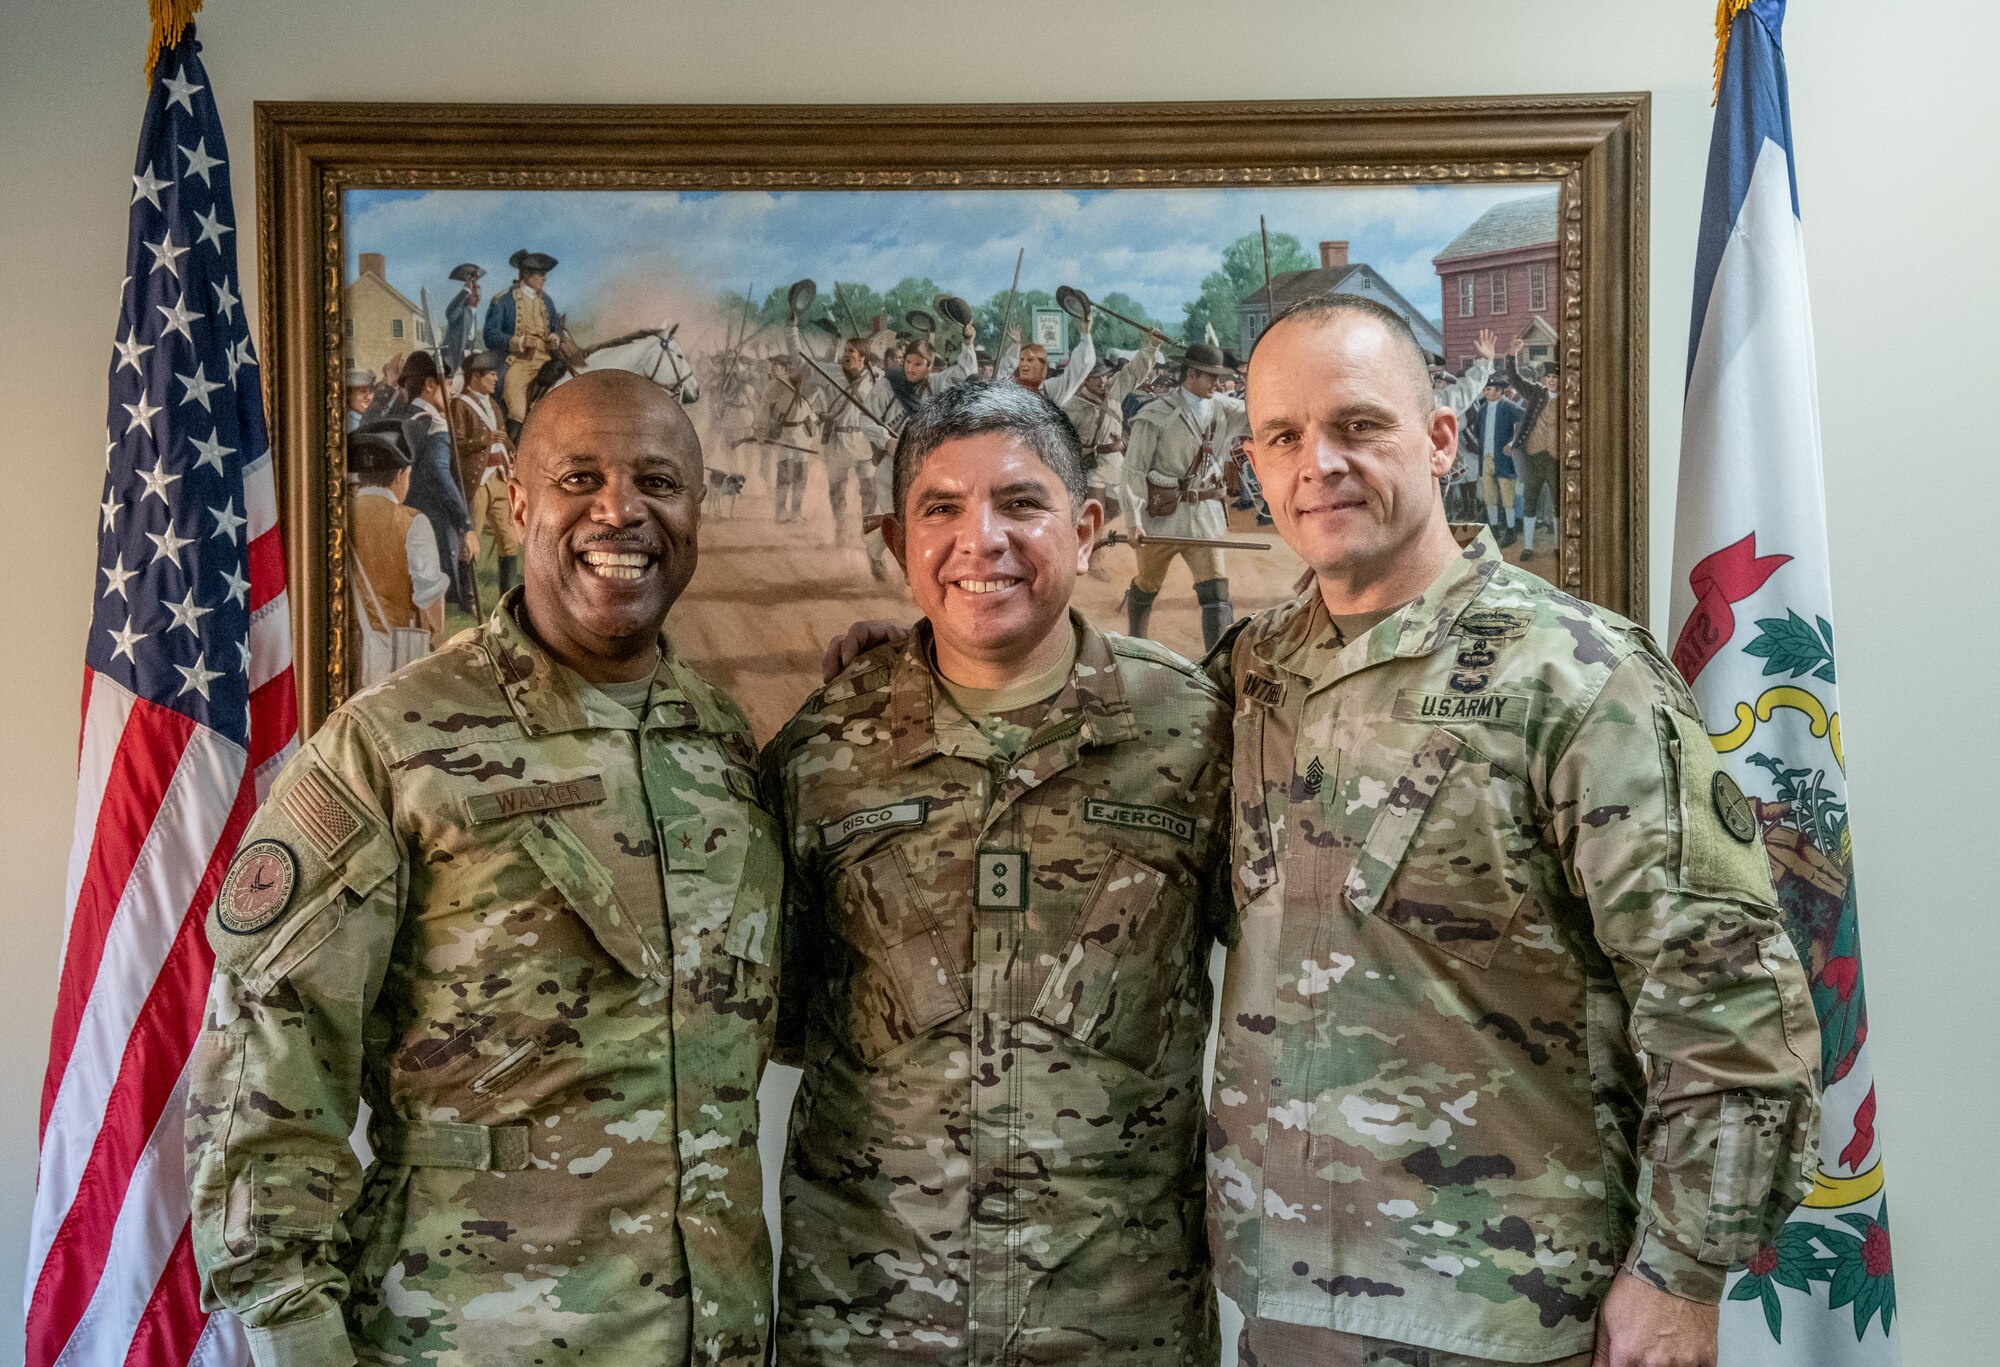 Maj. Gen. Mario E. Risco, Defense and Military Attaché to the Embassy of Peru in Washington, D.C., poses for a photo with Brig. Gen. Christopher “Mookie” Walker, Assistant Adjutant General – Air of the West Virginia National Guard (WVNG), and Senior Enlisted Leader, Command Sgt. Maj. Phillip Cantrell, during a State Partnership Program (SPP) visit at Joint Force Headquarters, Charleston, W.Va.